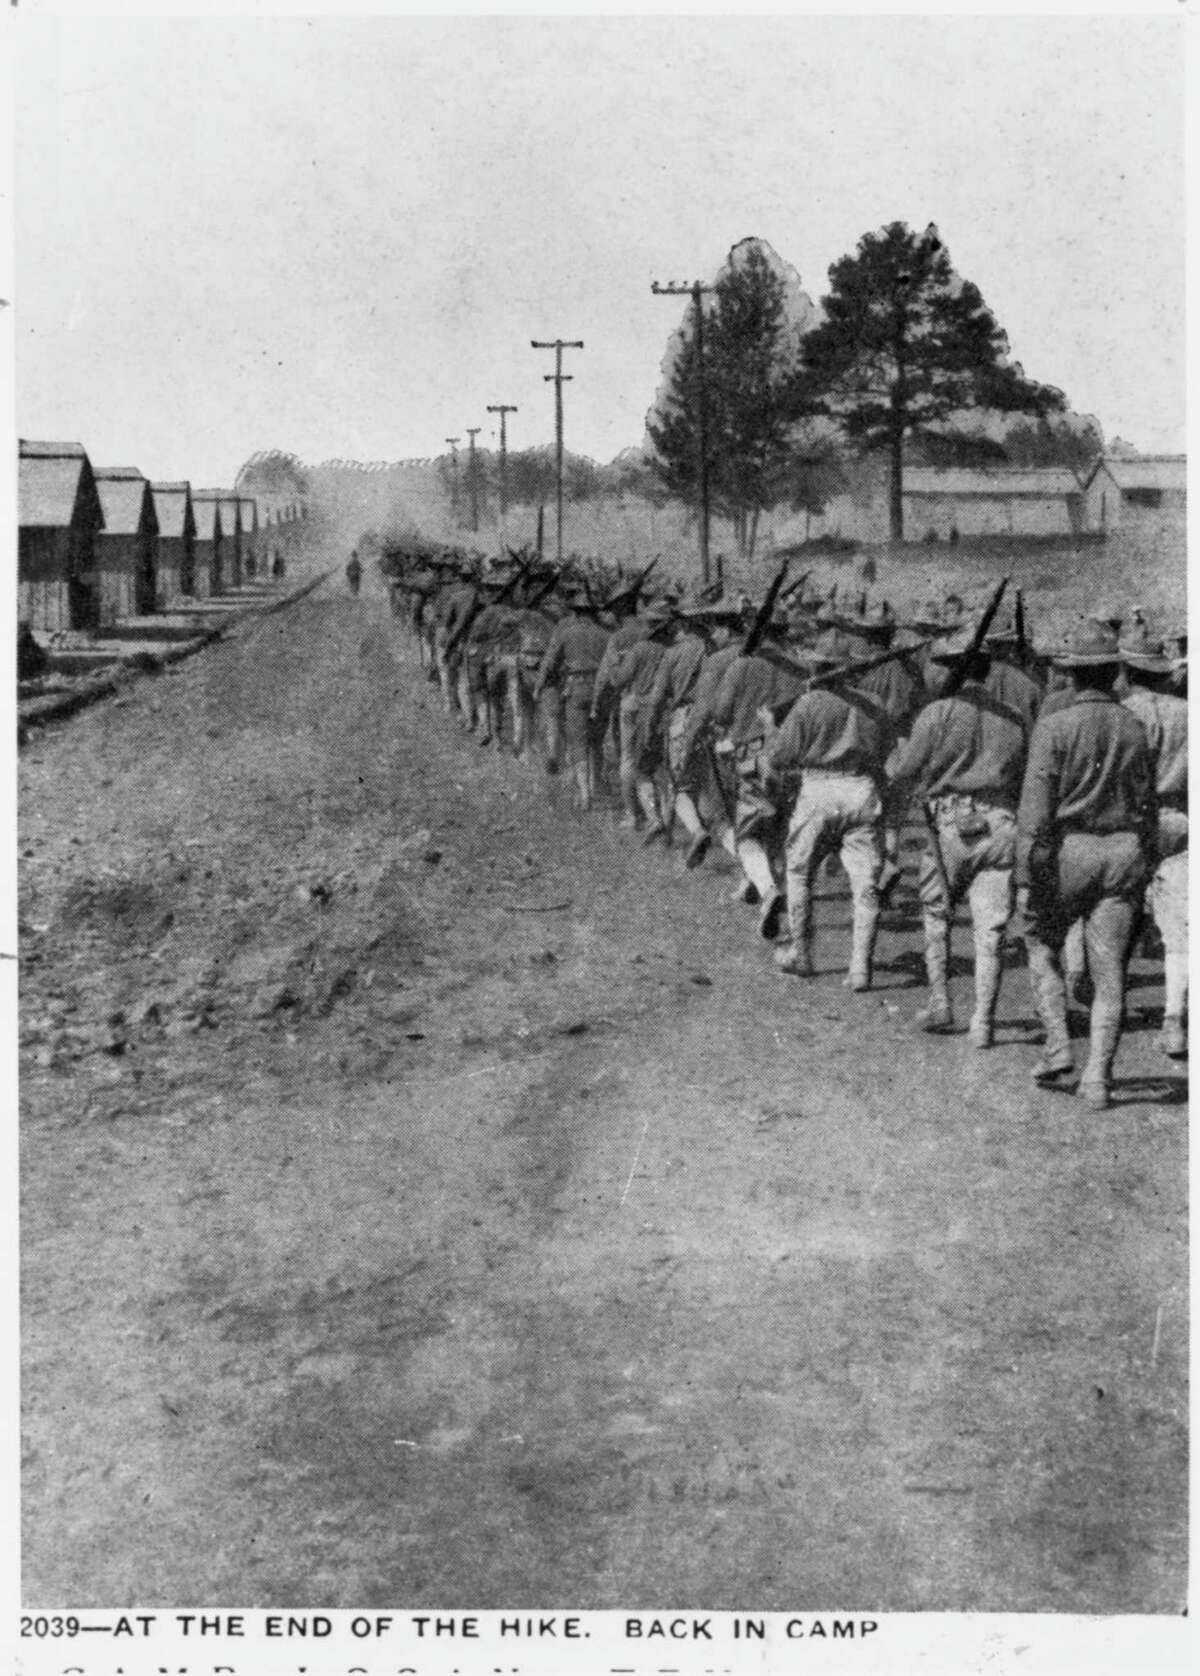 Soldiers in training for service in World War 1, heading back to Camp Logan after a hike through the area that is now known as Memorial Park. This photograph is among those belonging to the Houston Public Library that chronicle the history of Houston.